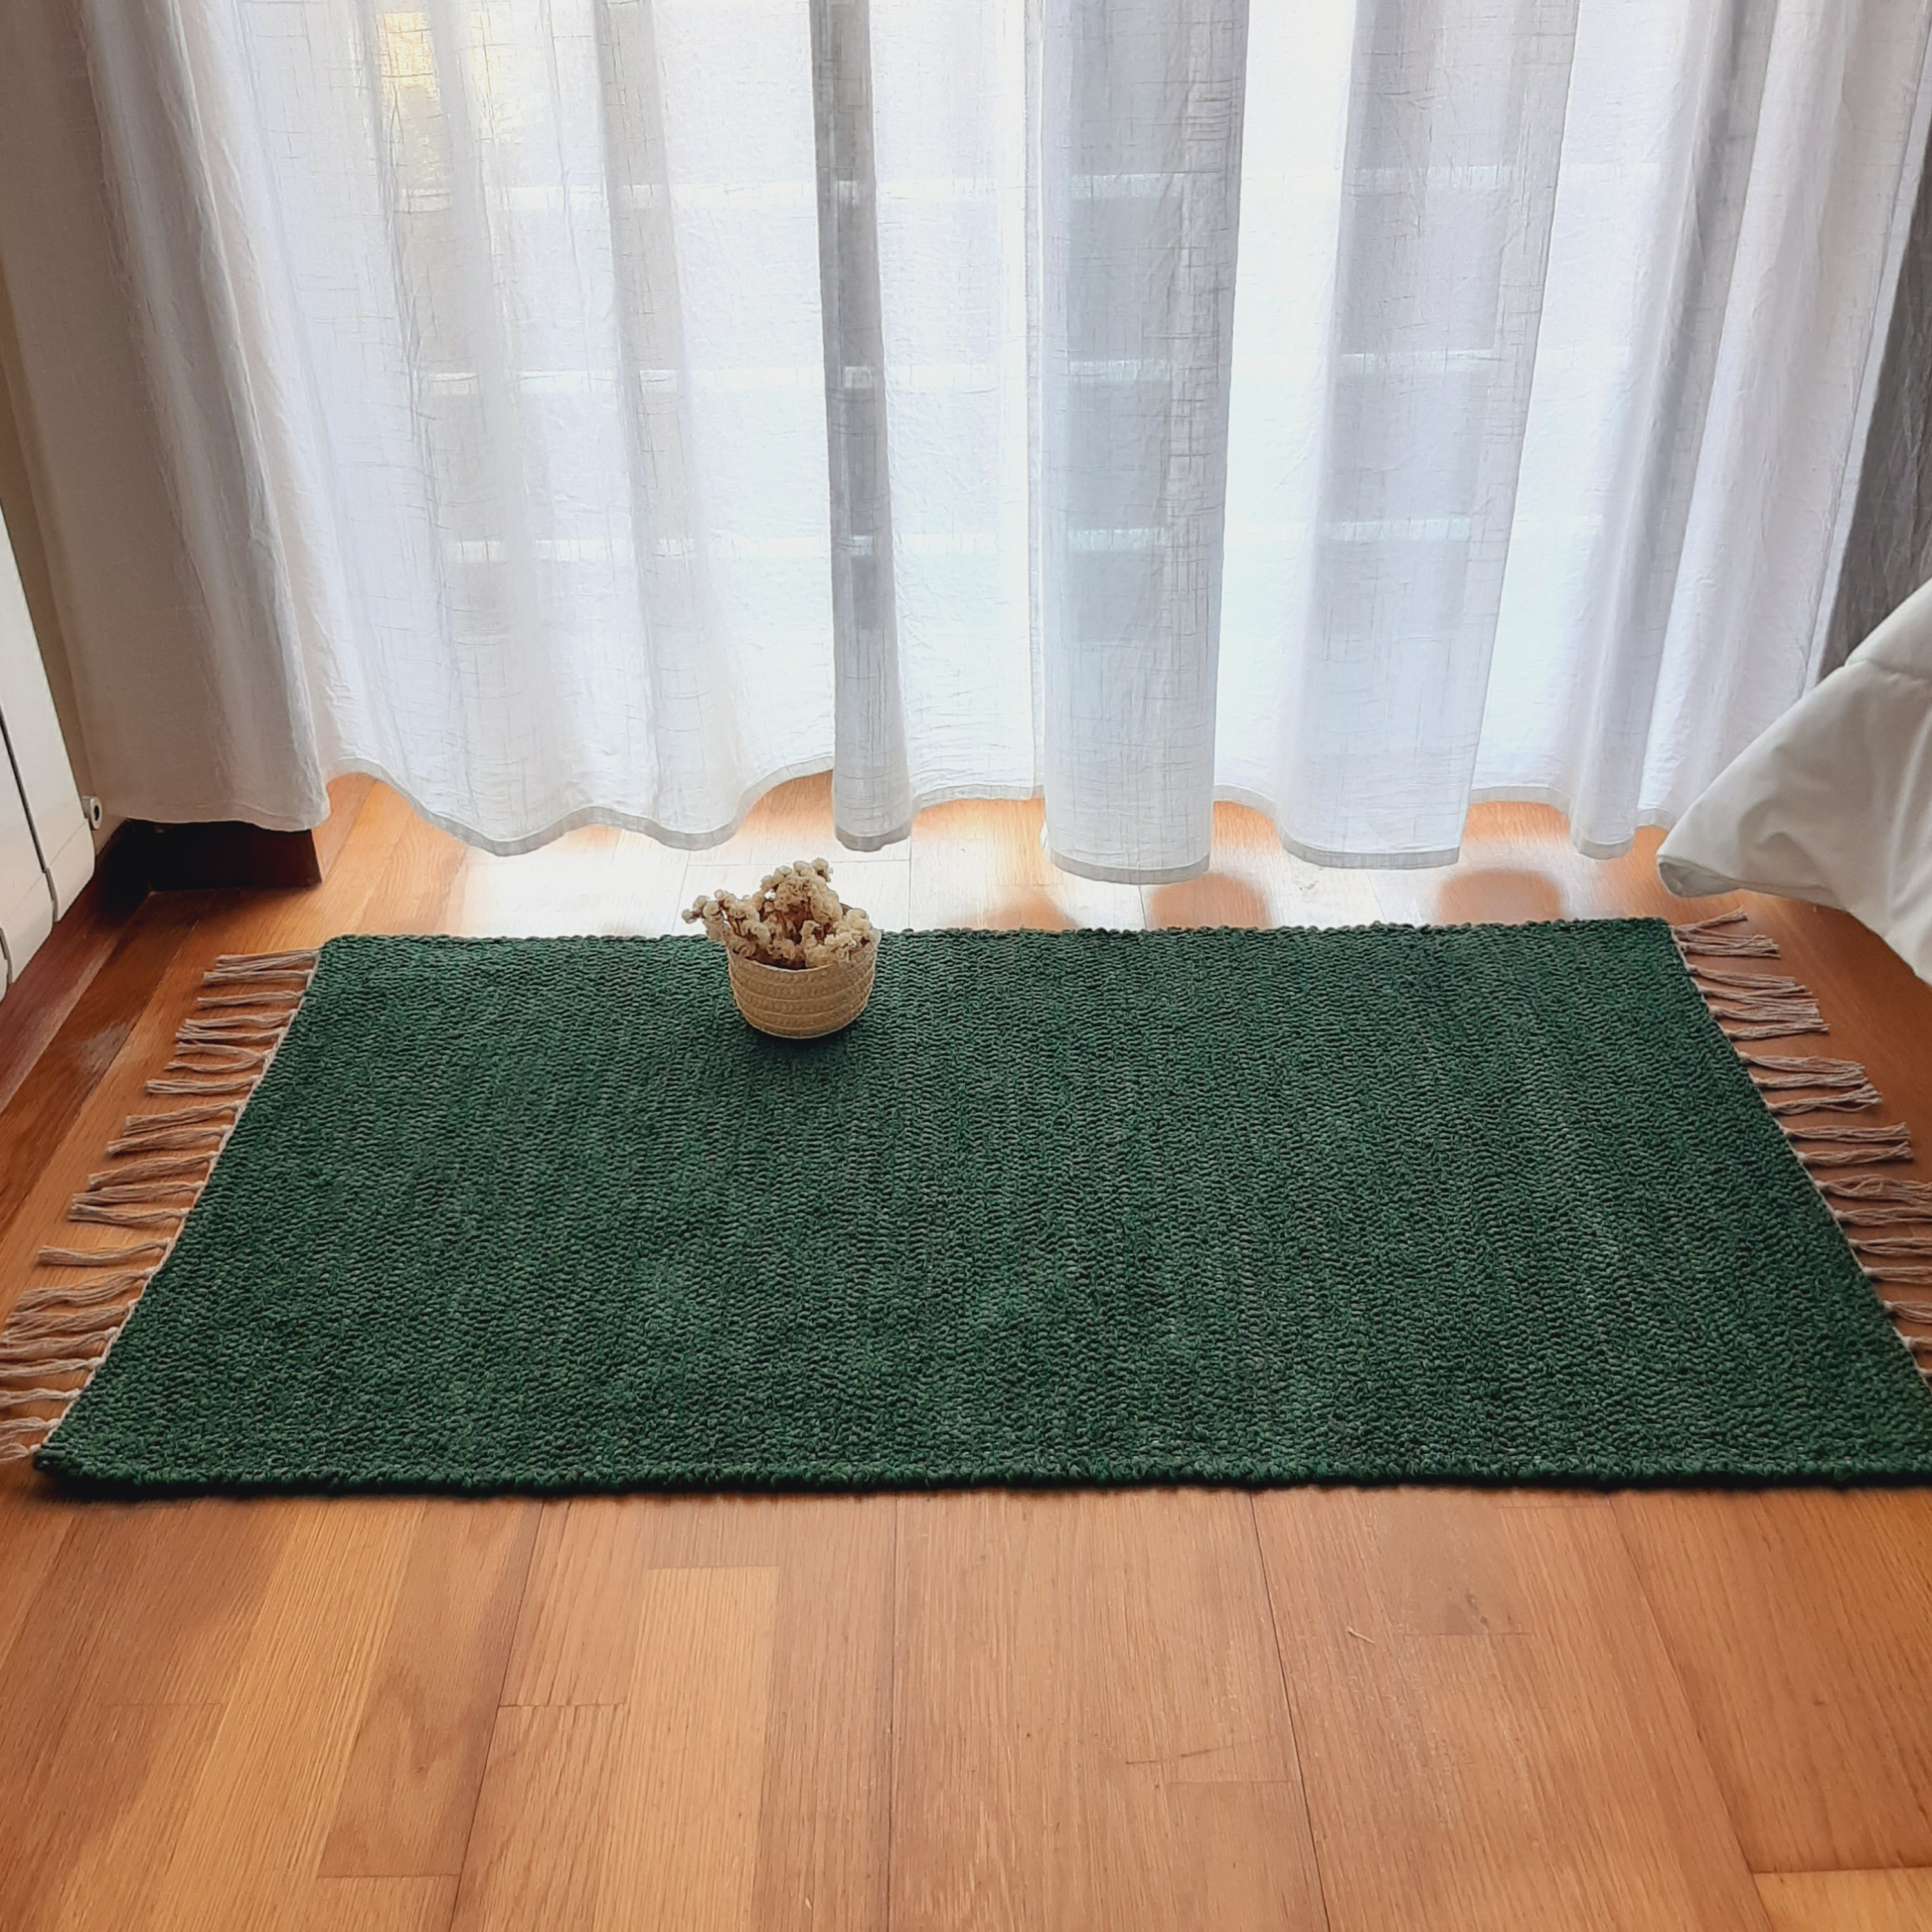 How To Style A Vintage Mini Rug - Dream Green DIY